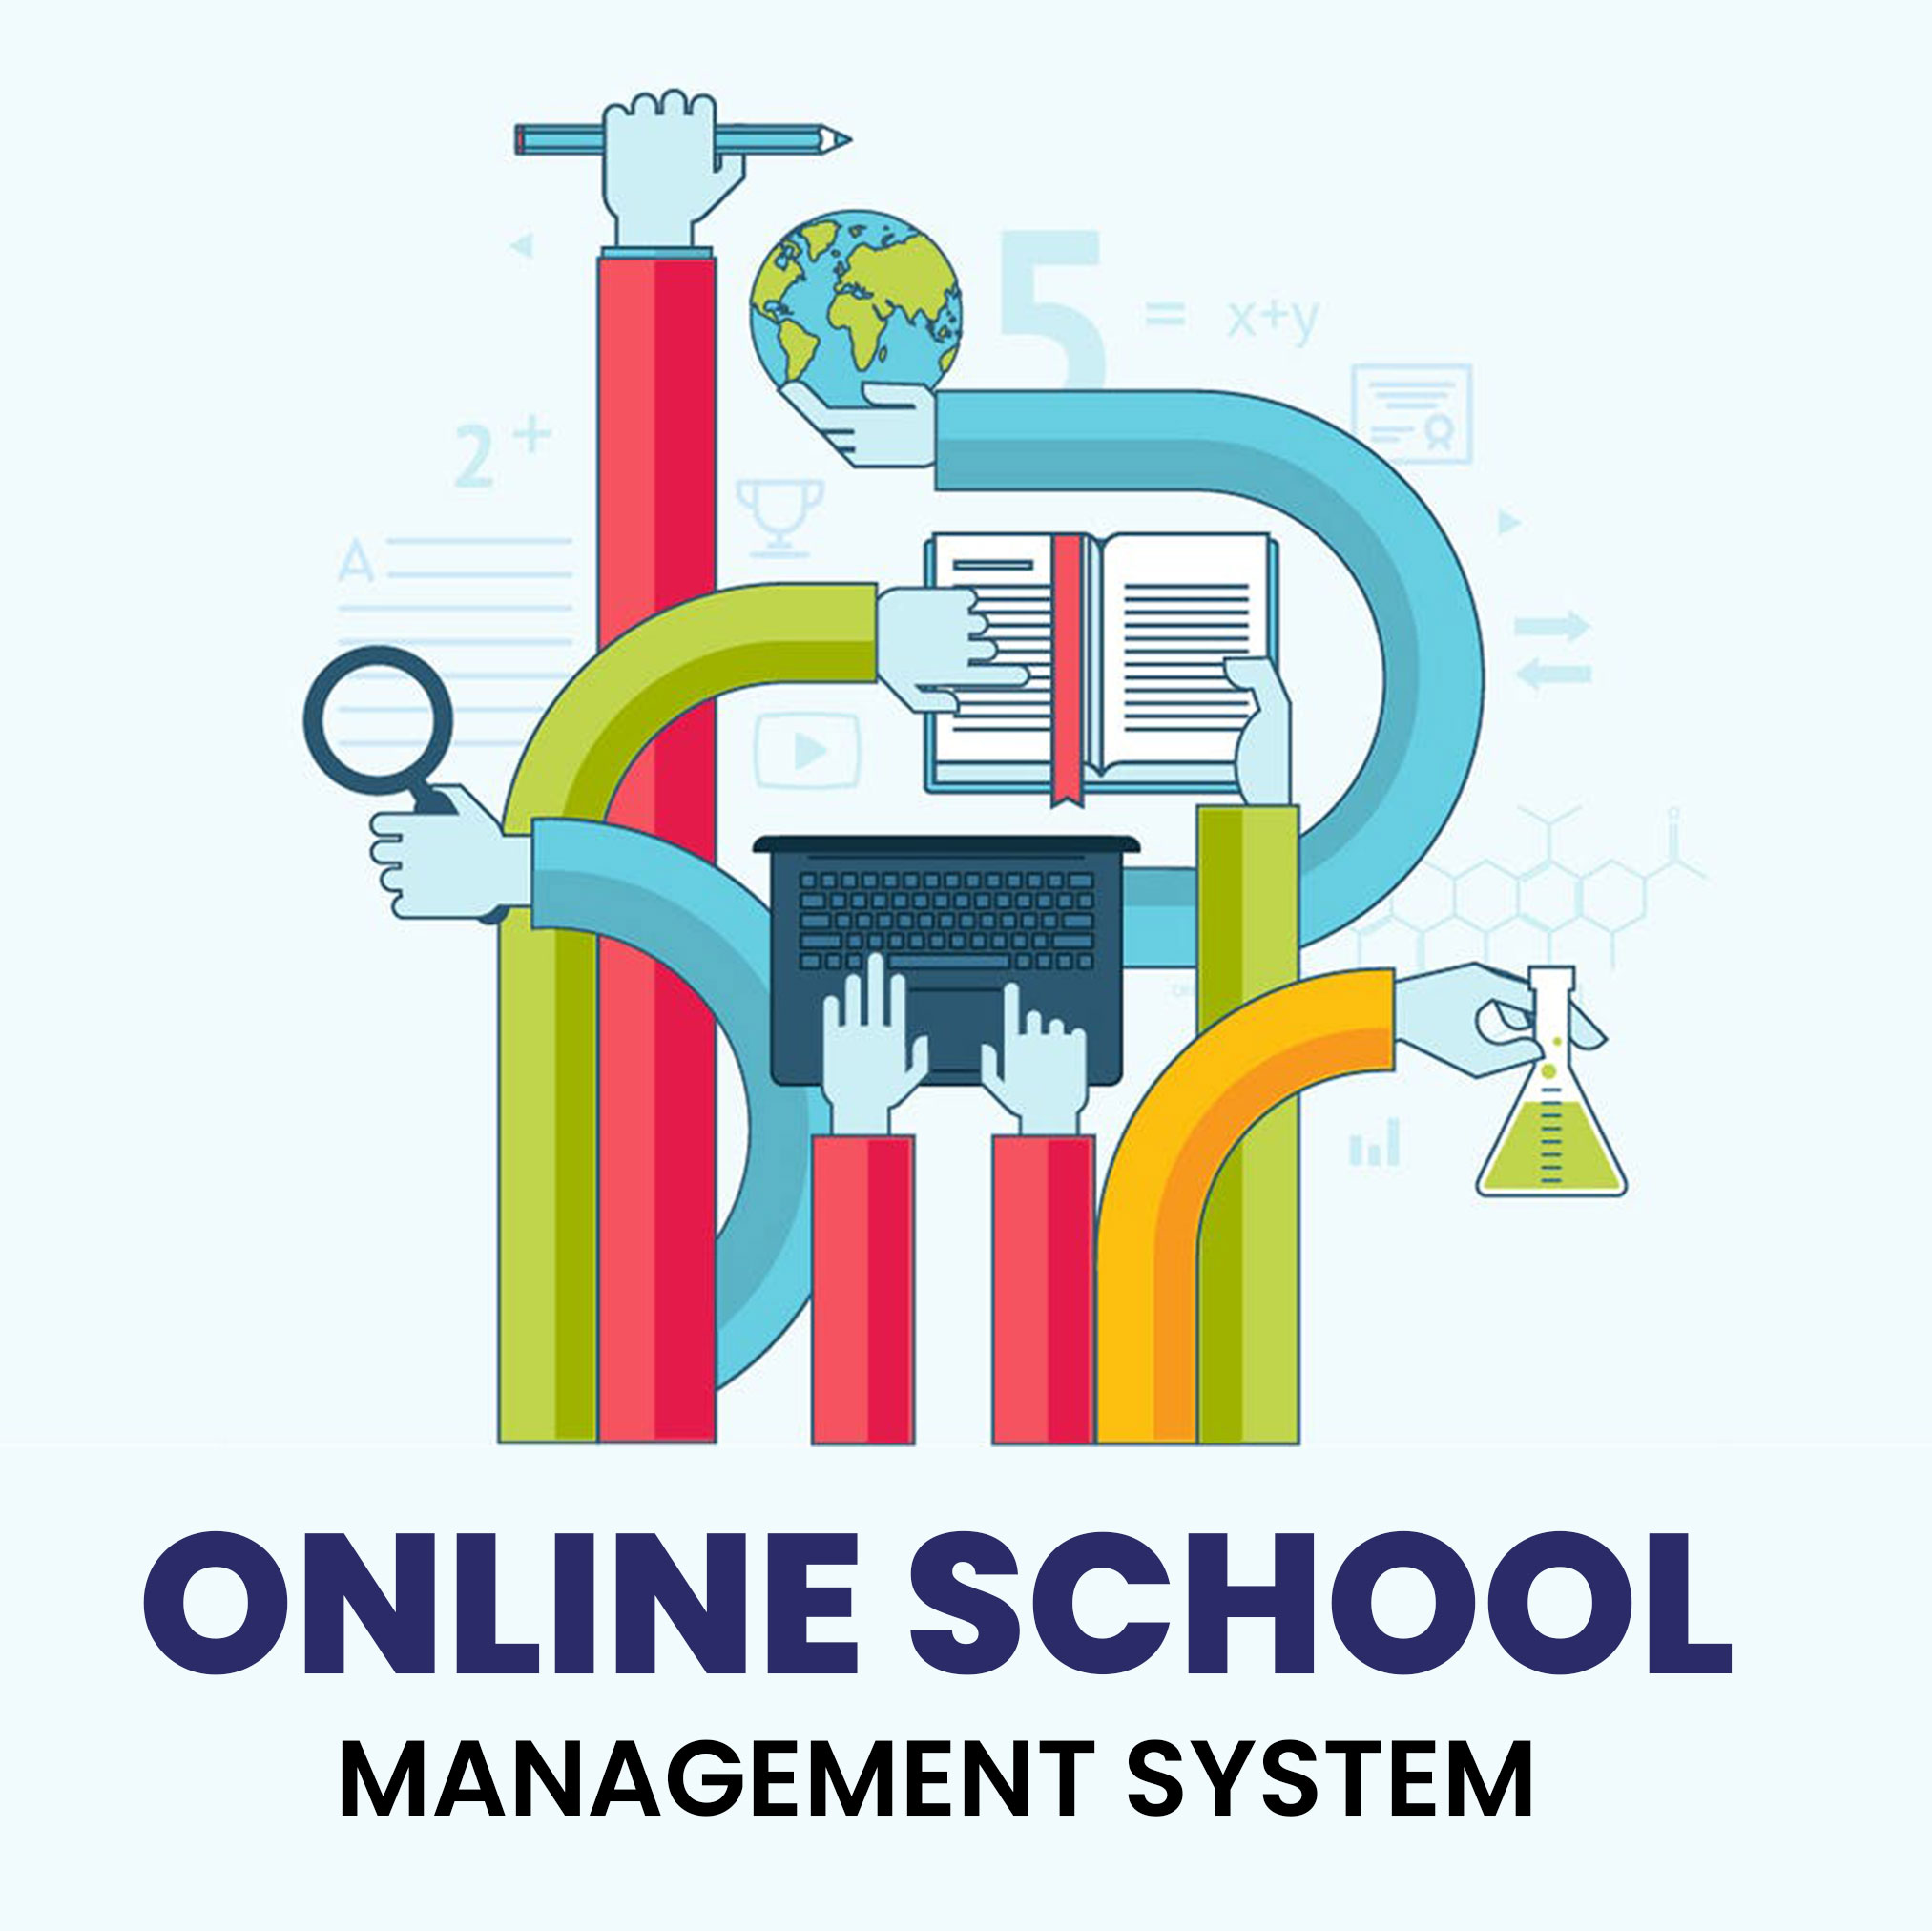 Significance of an Online School Management System